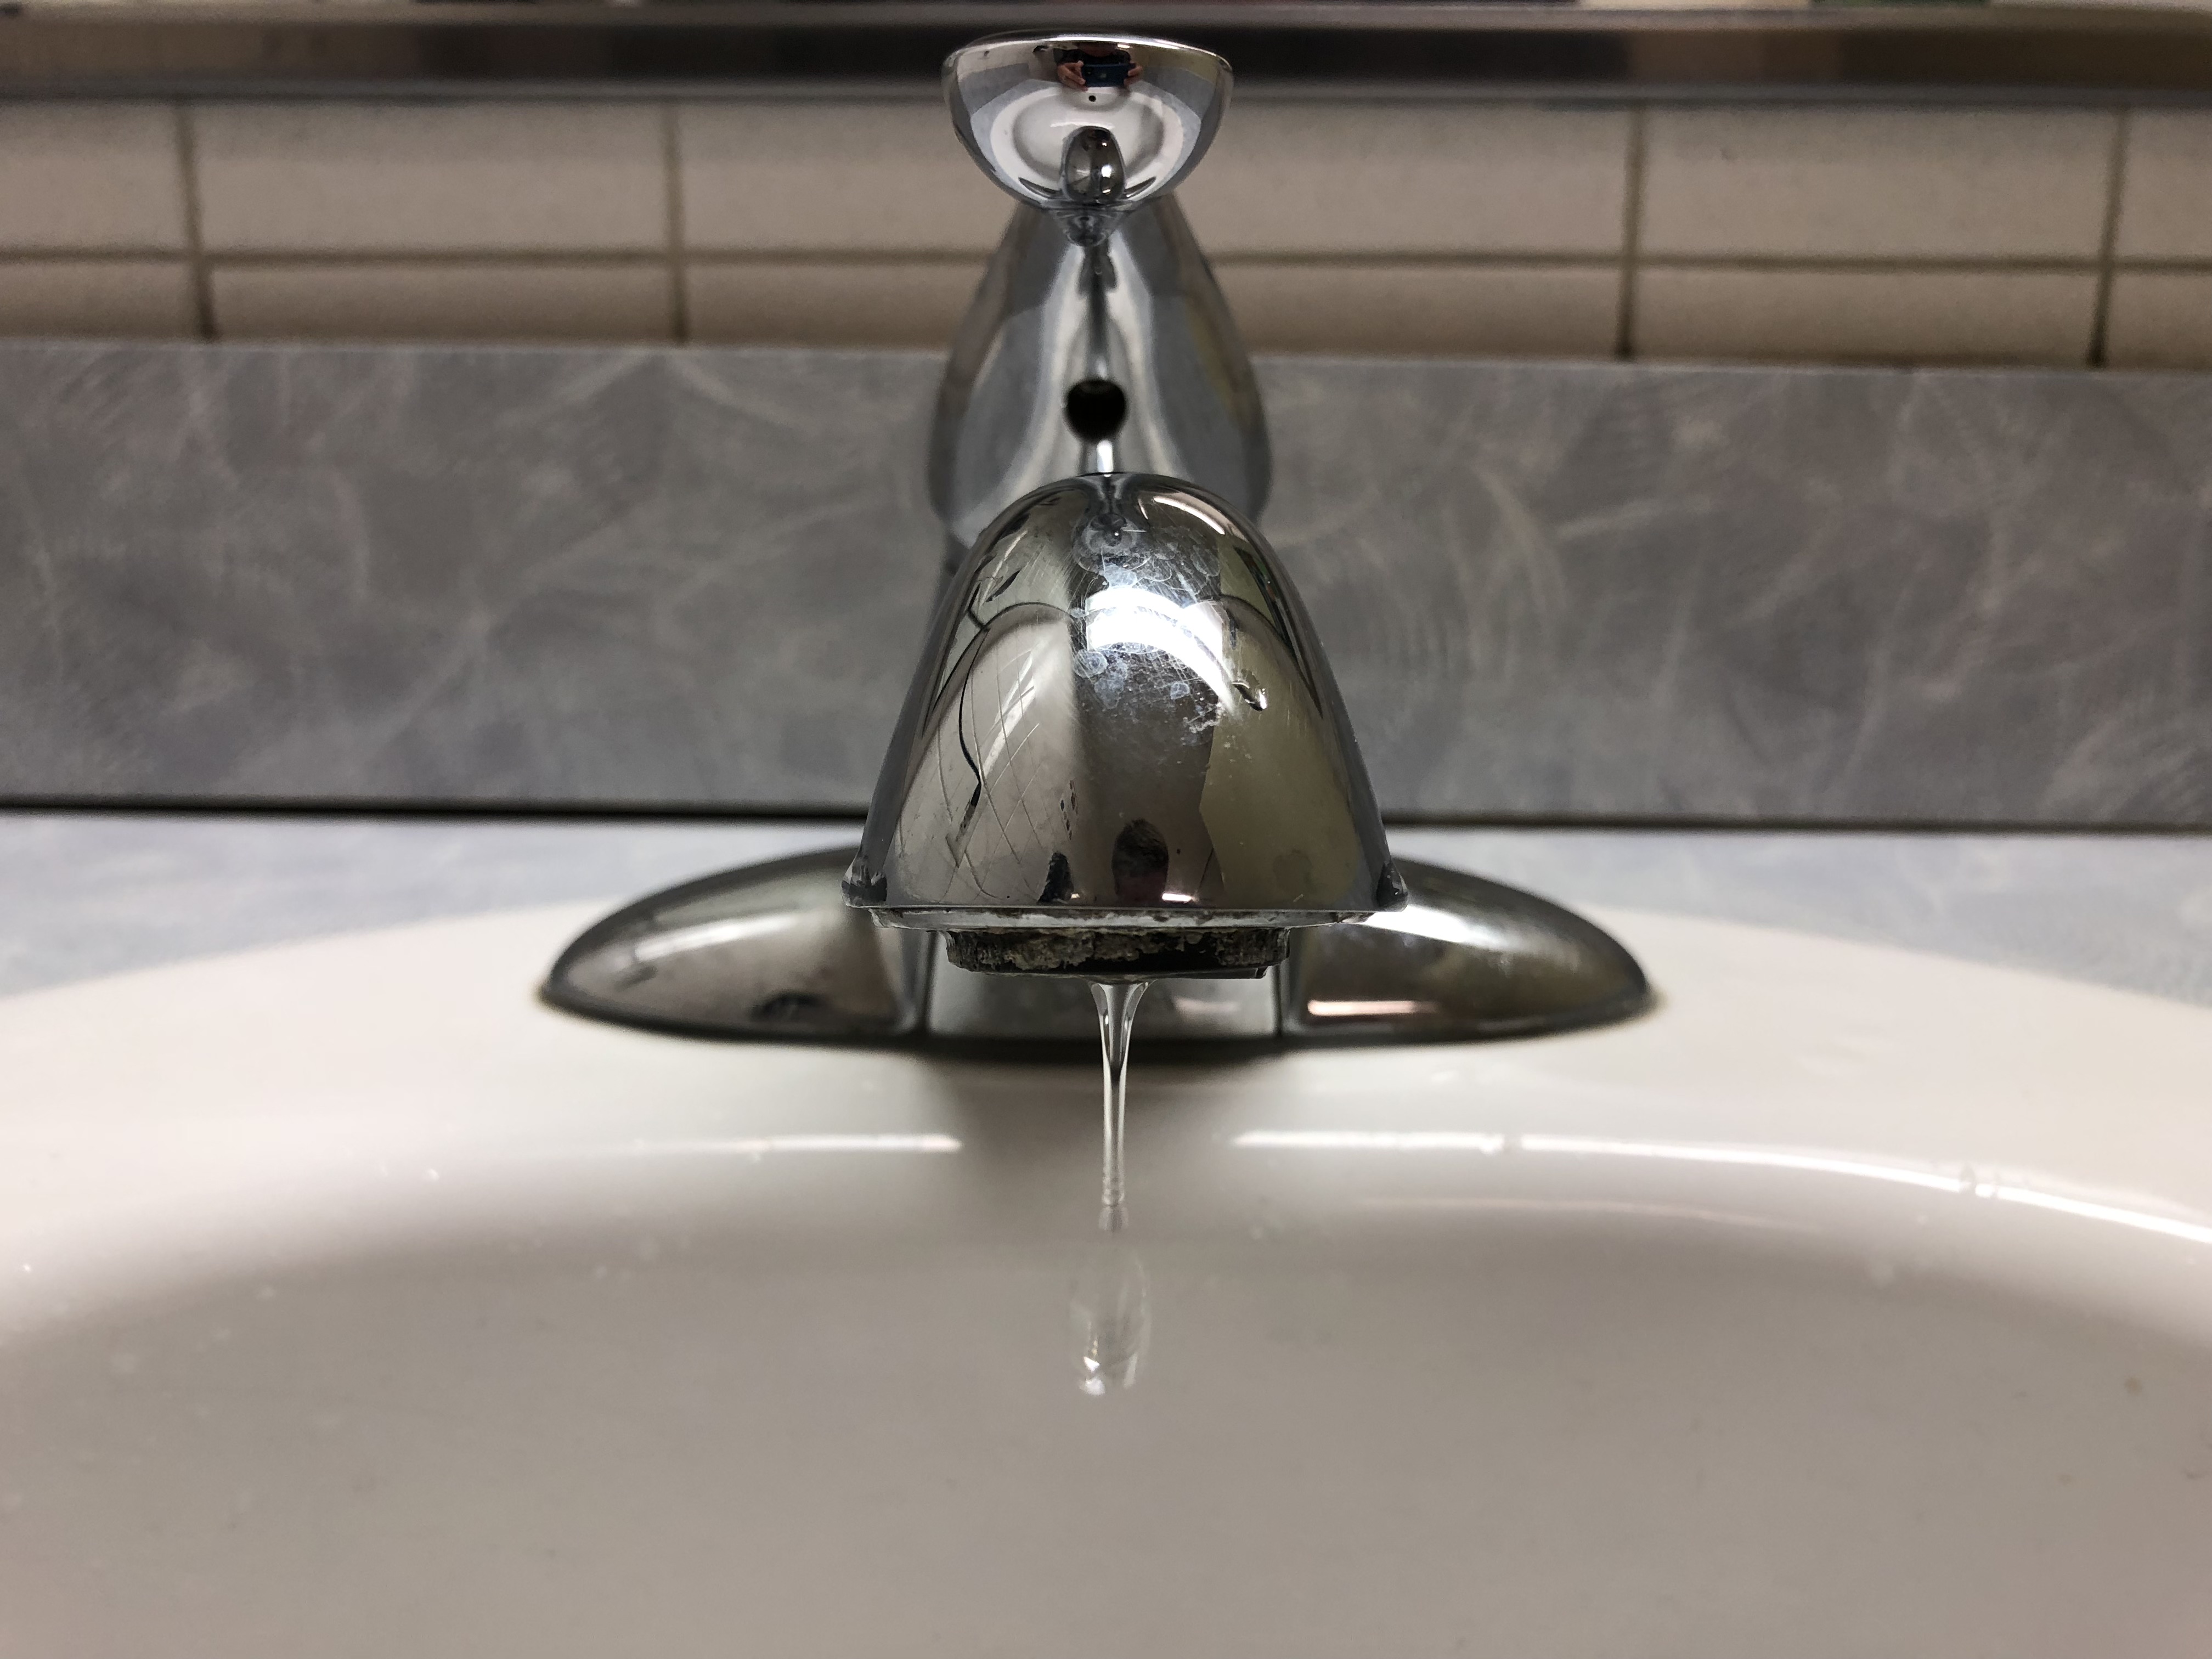 Detroit Water Quality Tests Below State's Action Level But Funding Challenges Remain - WDET